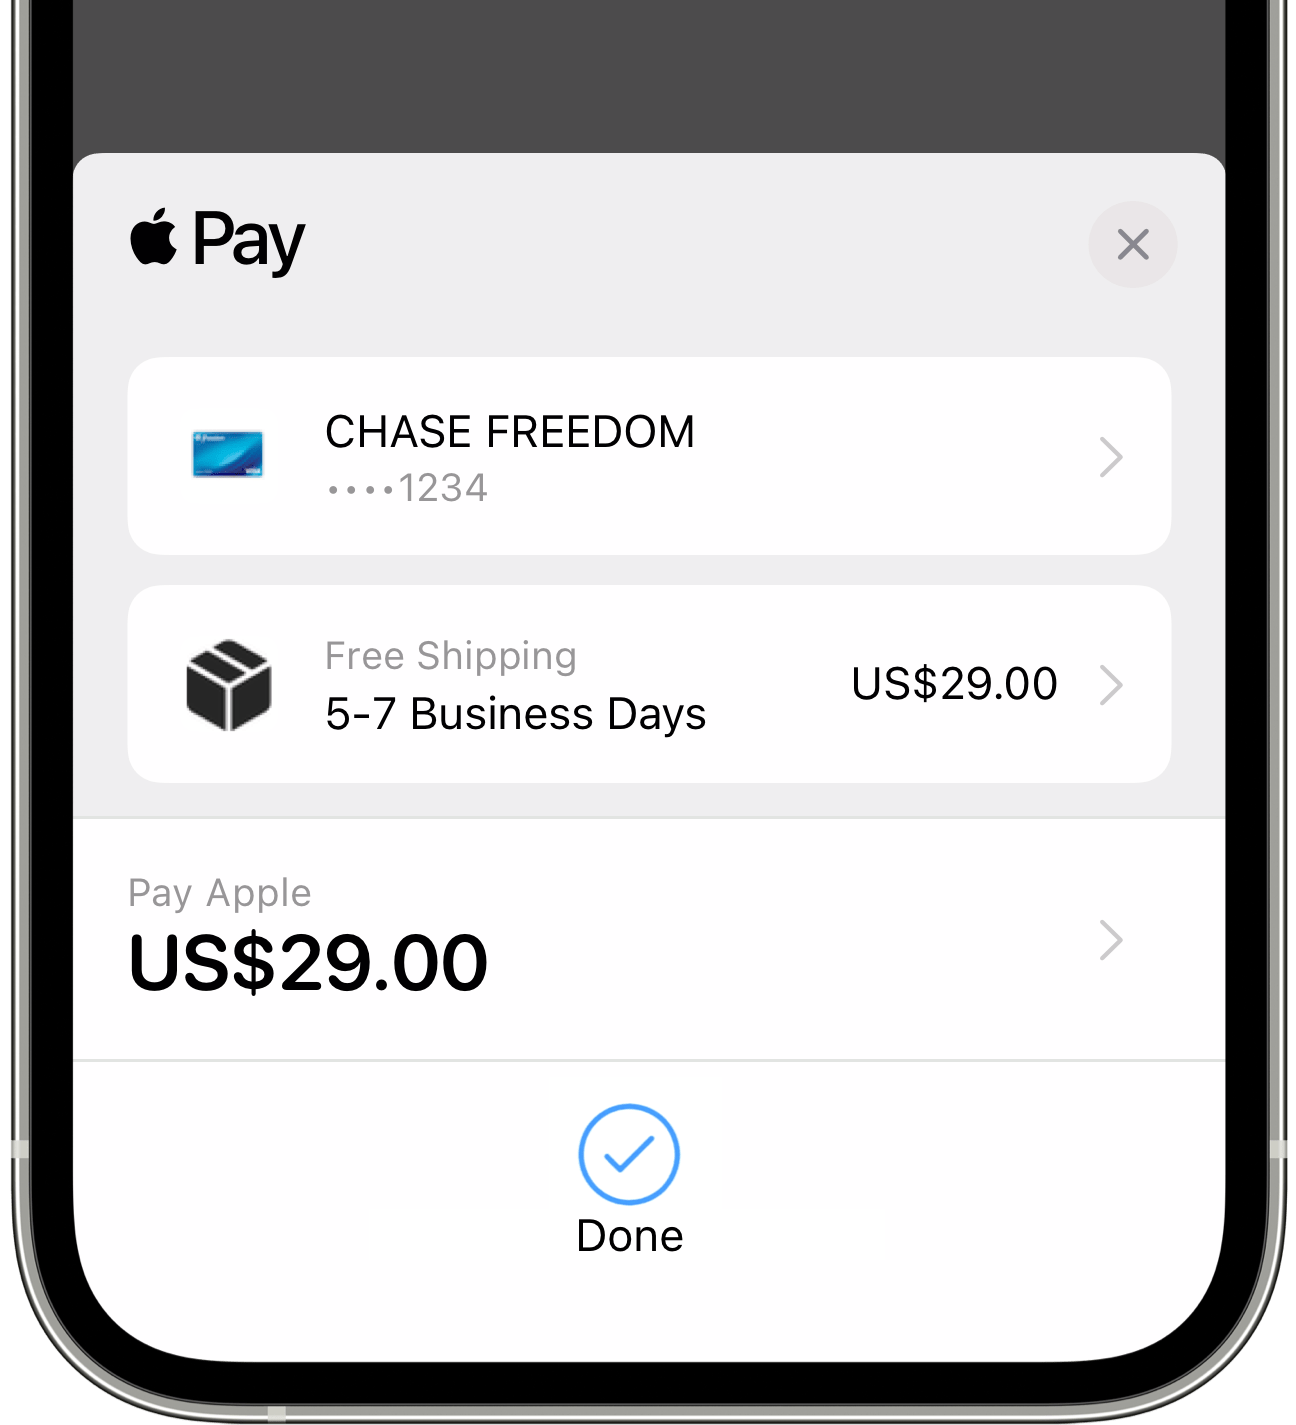 Payment confirmed